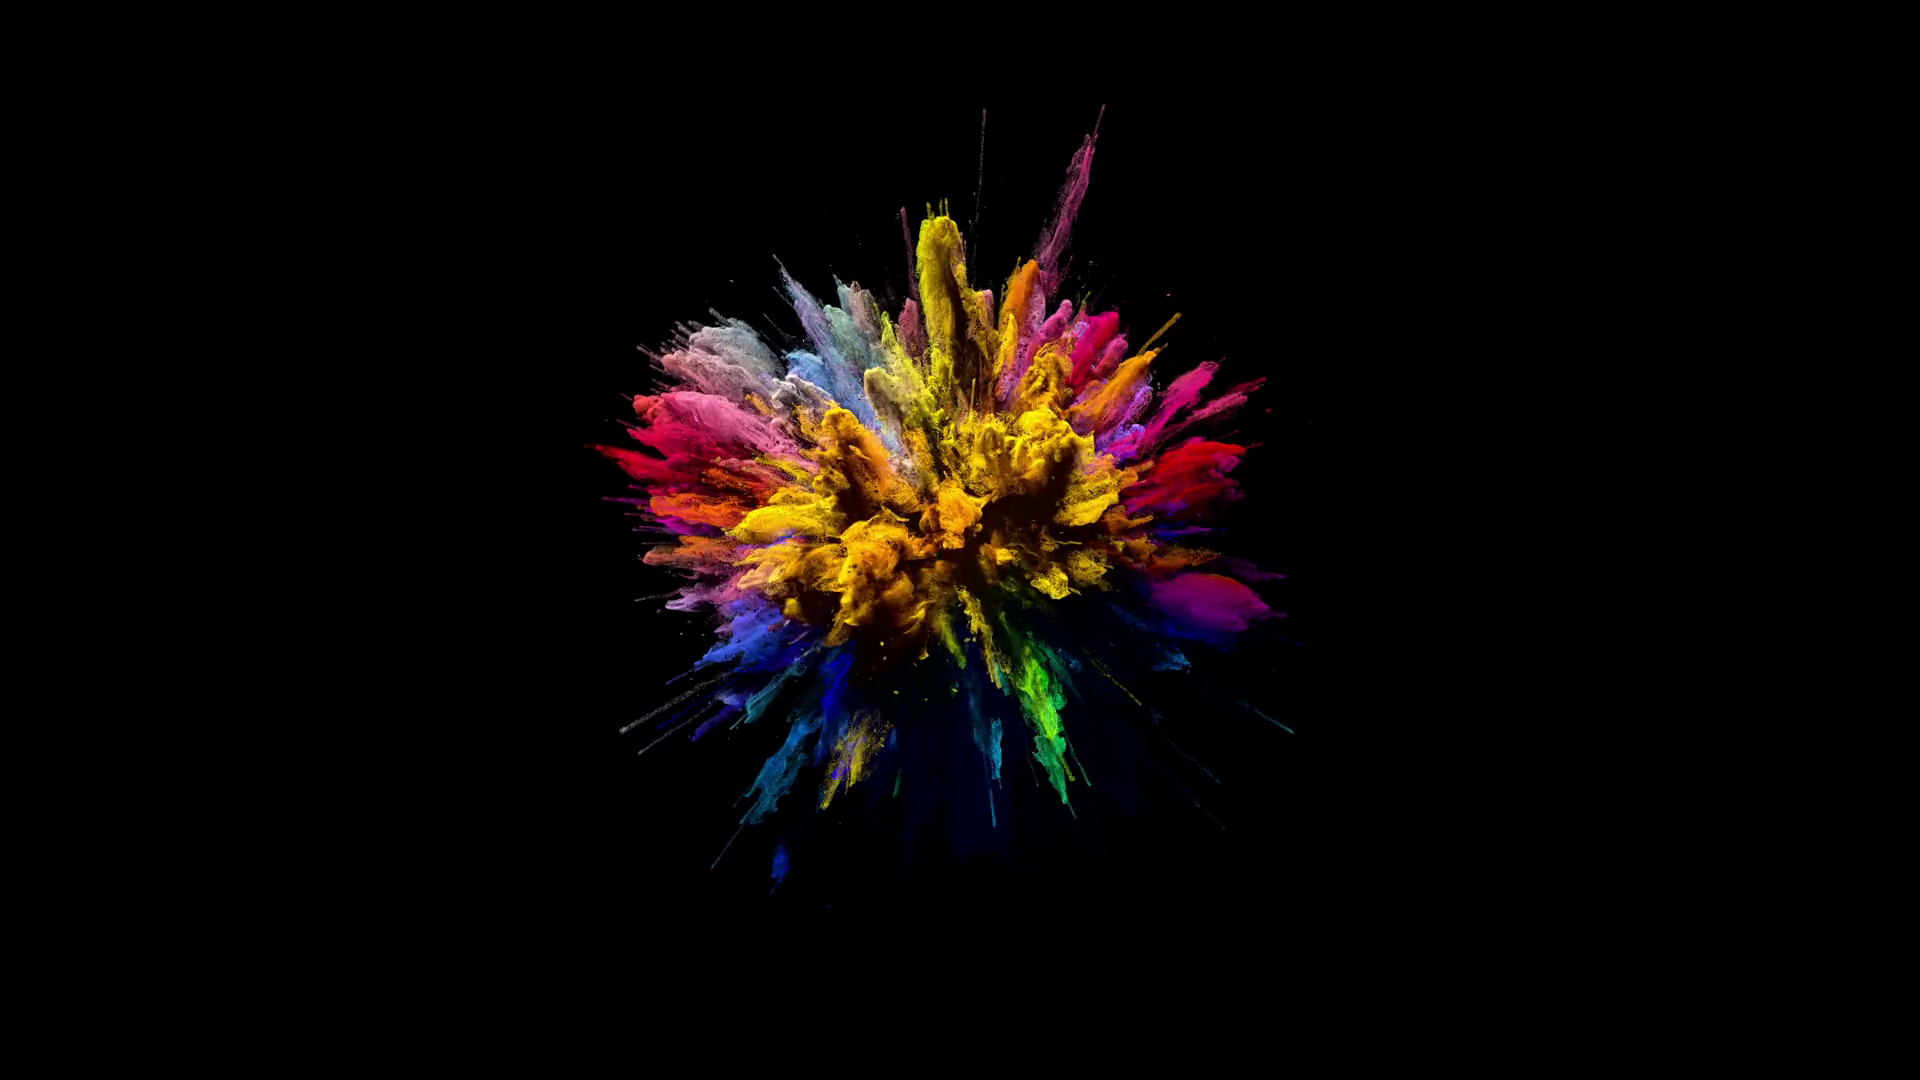 Cg Animation Of Color Powder Explosion On Black Background HD Wallpaper